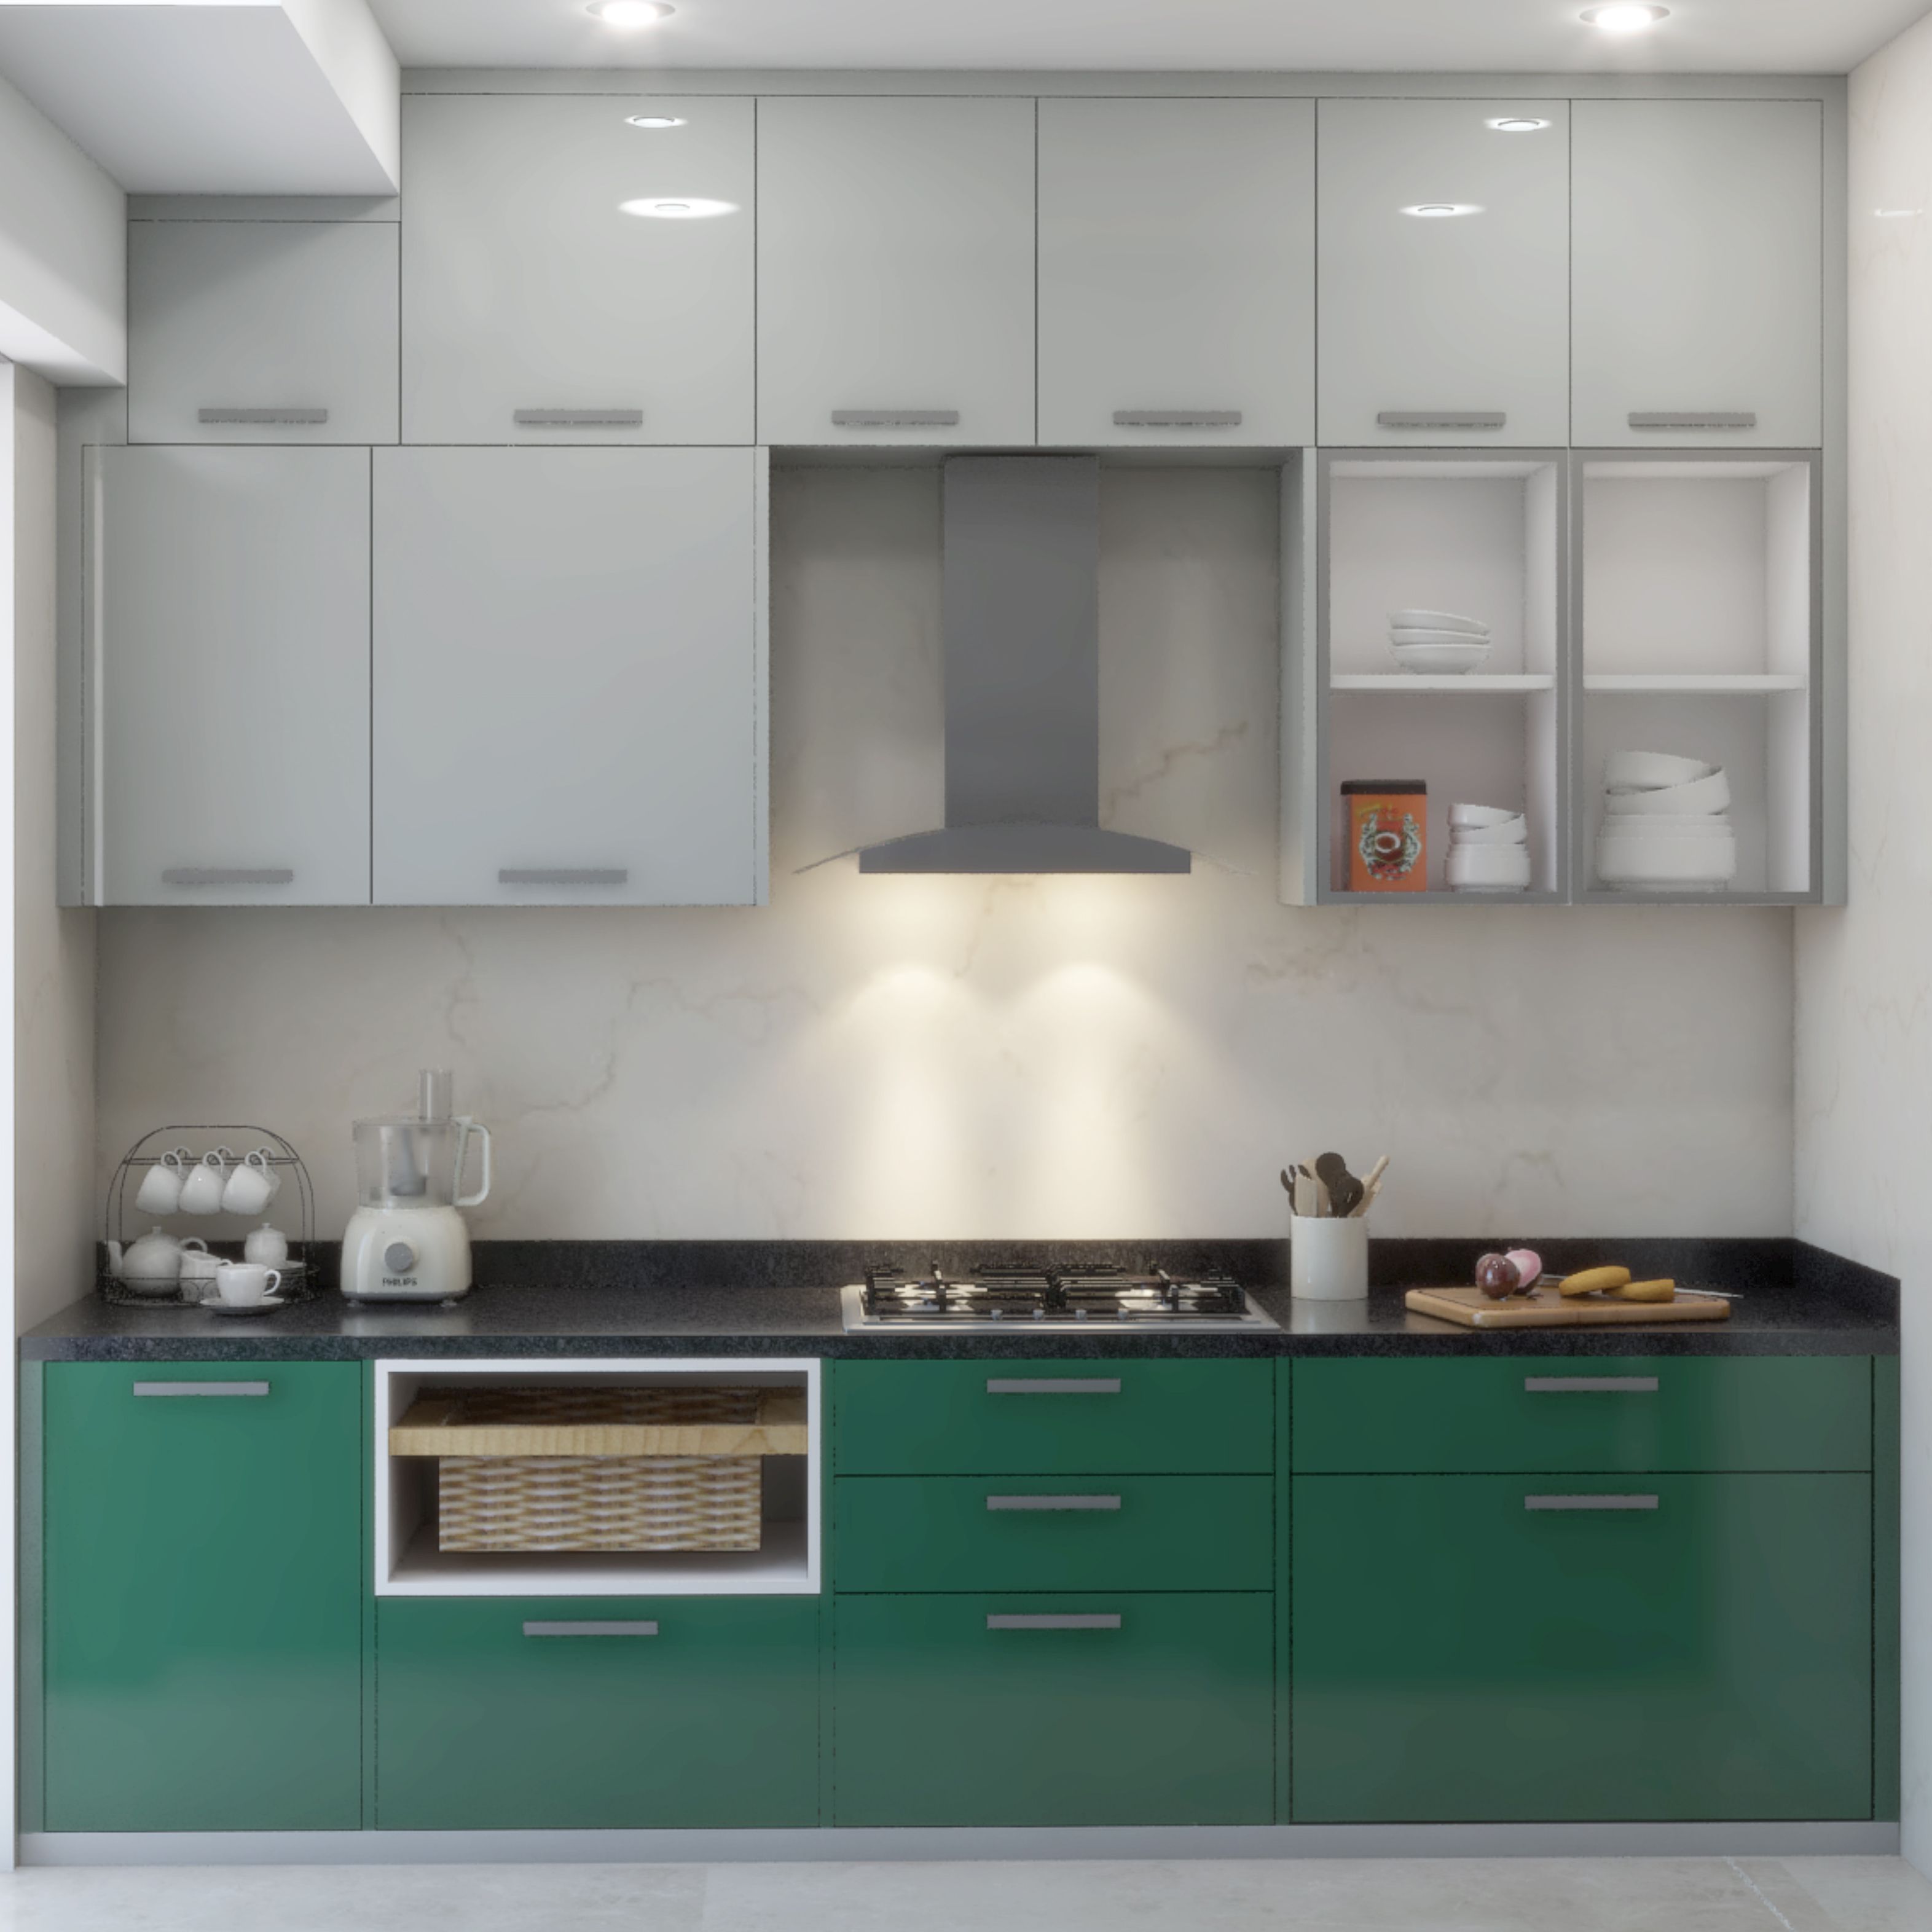 Contemporary Modular Parallel Kitchen Design In Green And Grey